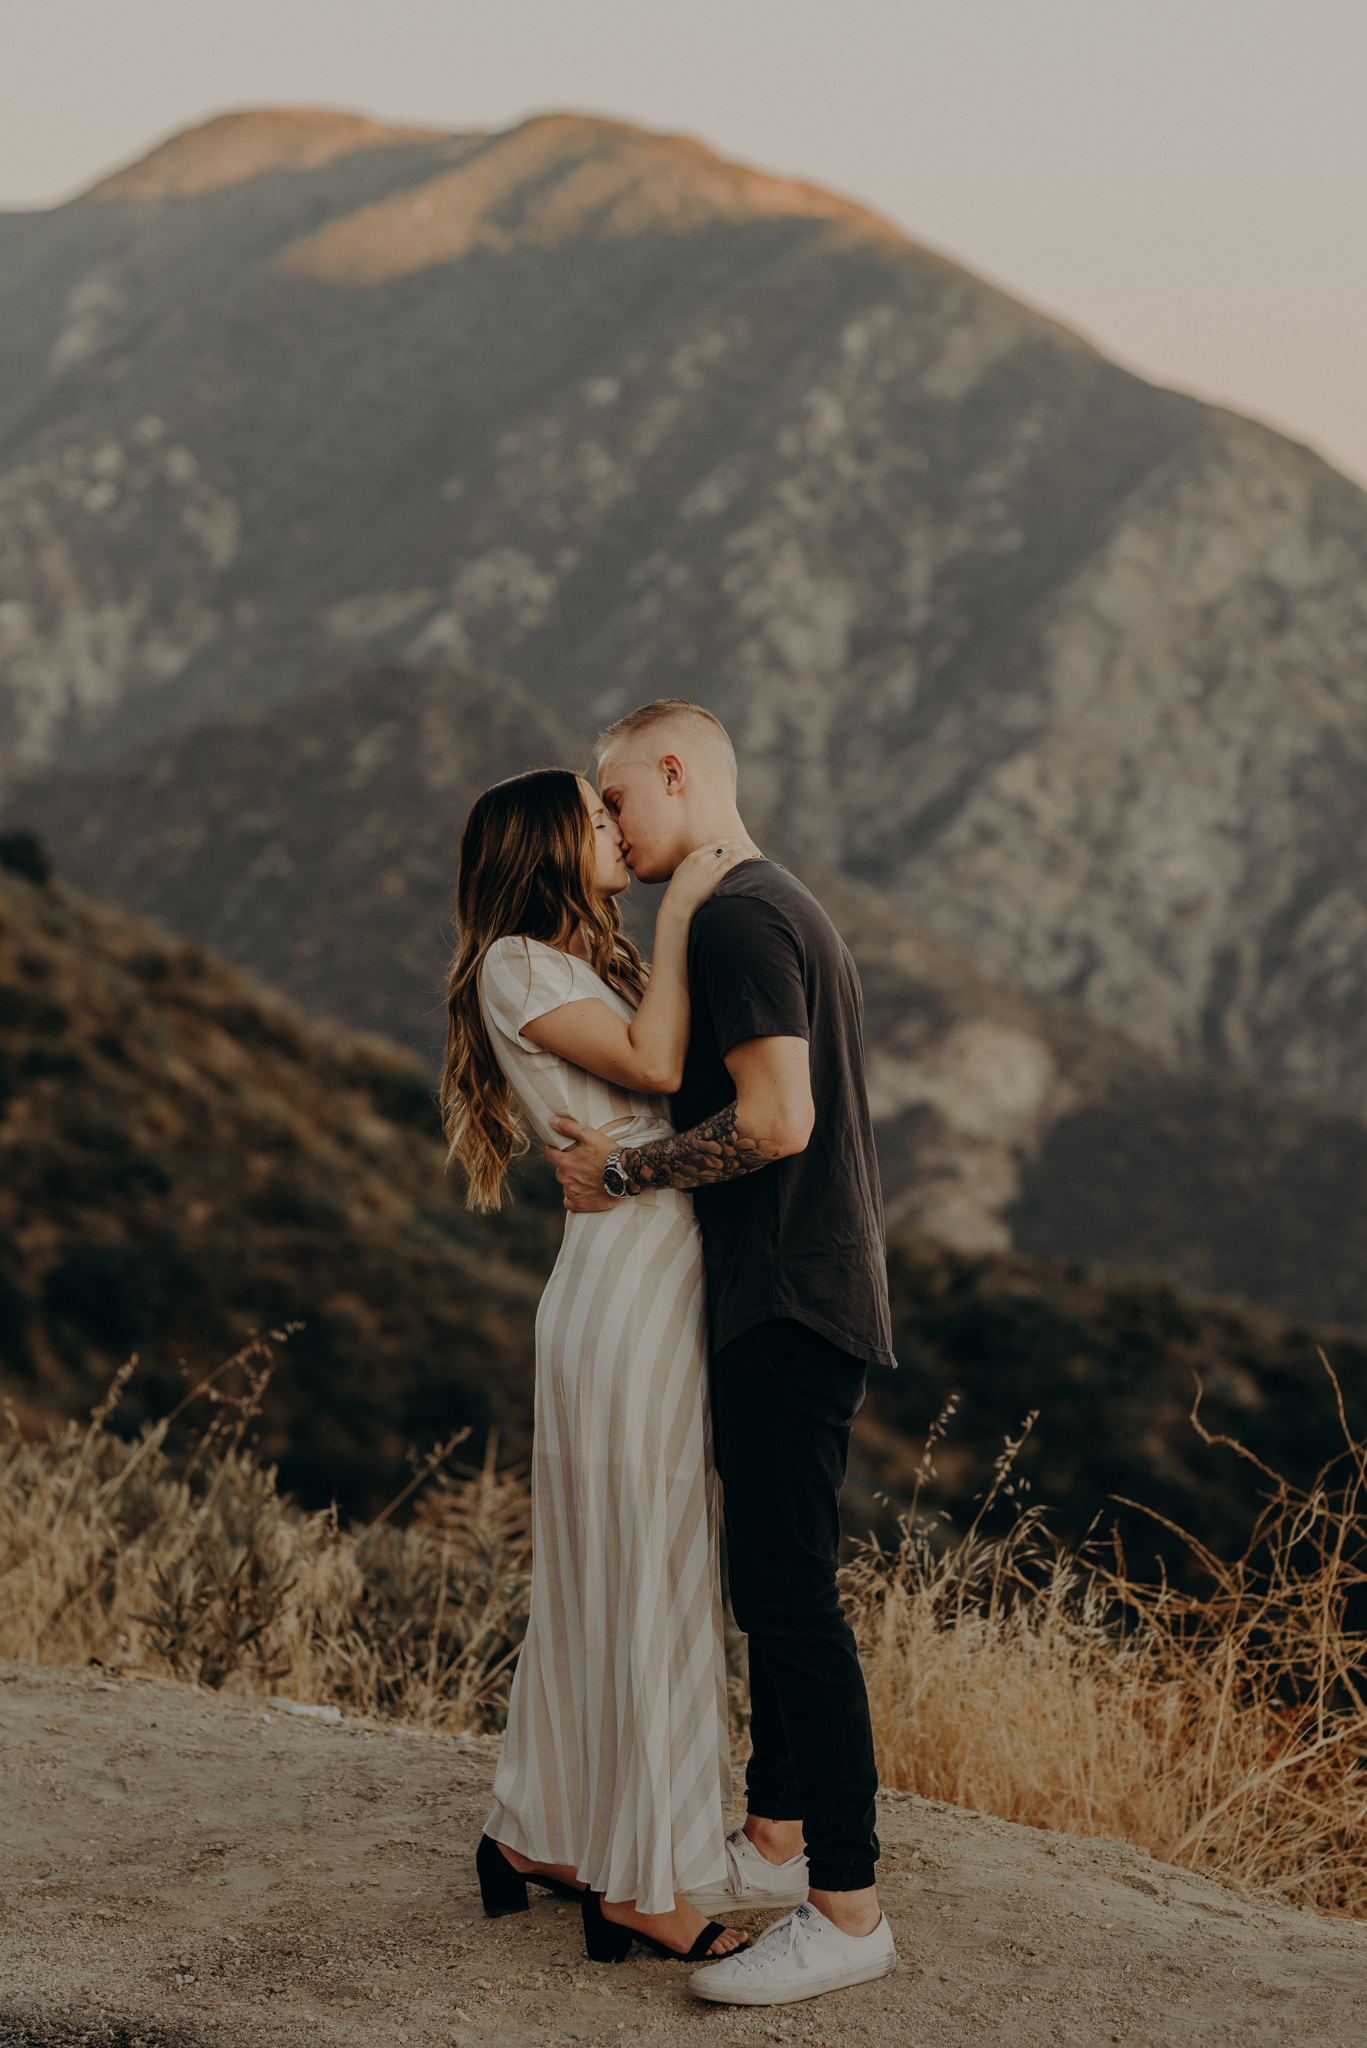 Isaiah + Taylor Photography - Los Angeles Forest Engagement Session - Laid back wedding photographer-011.jpg